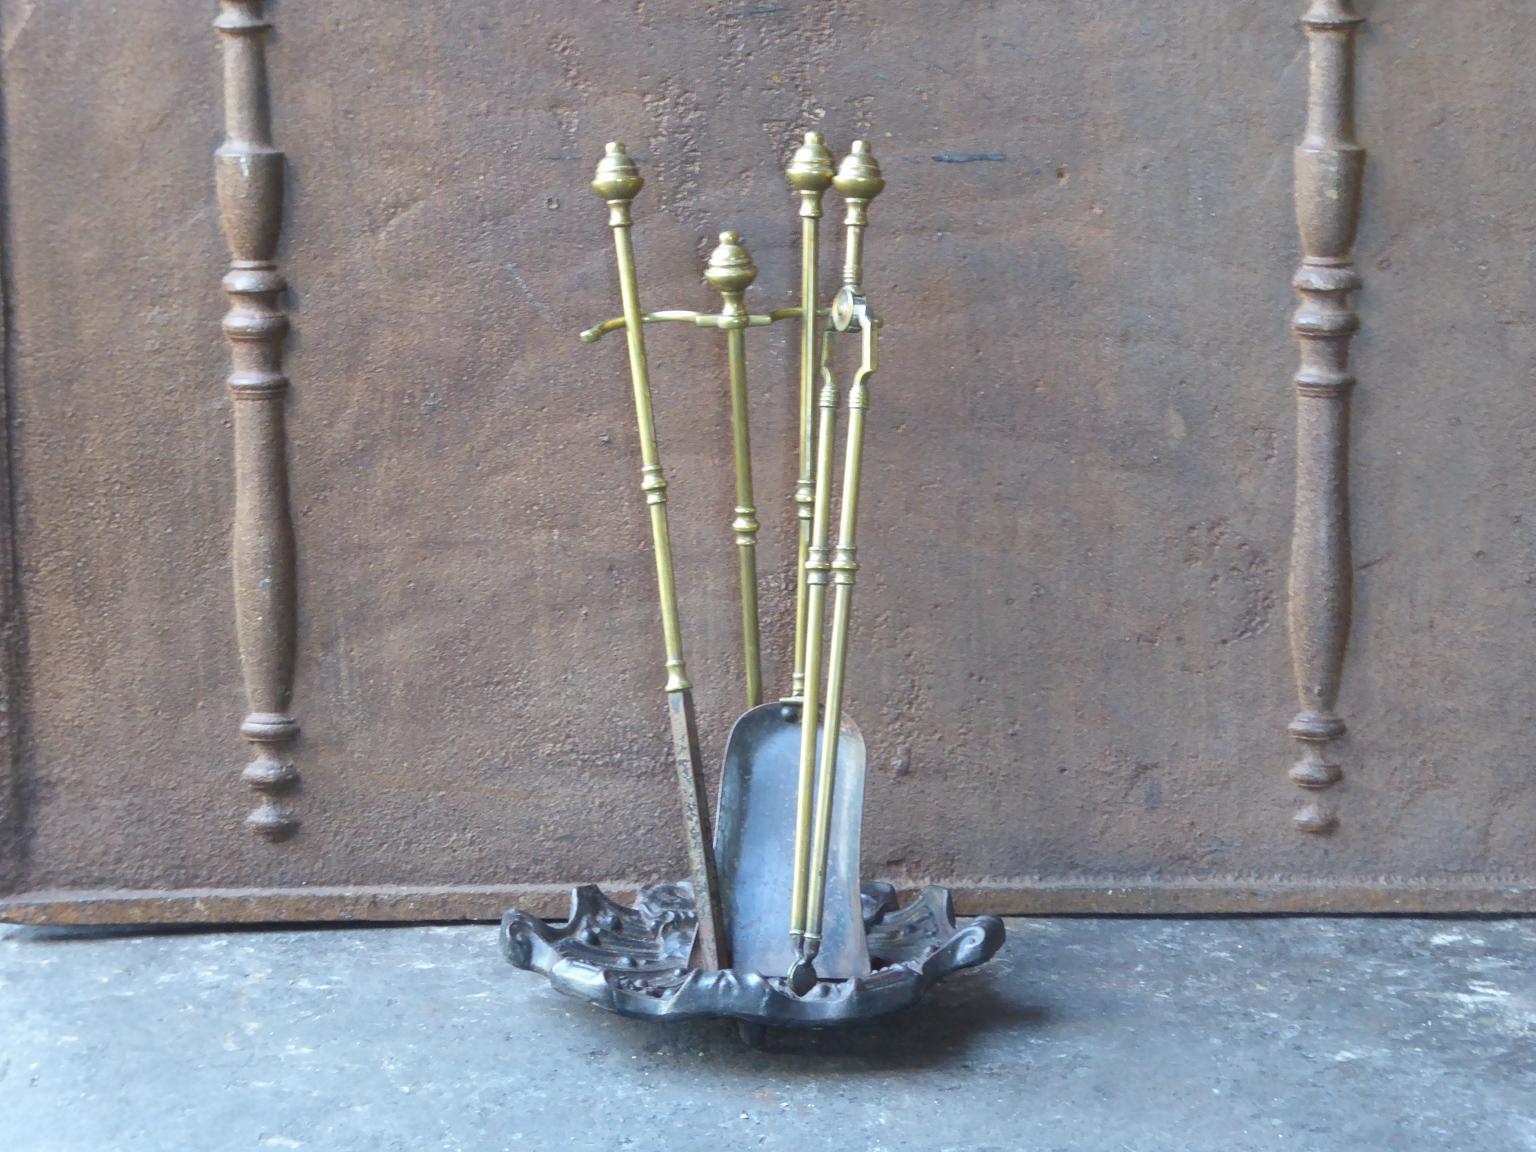 An elegant set of three brass fire tools and stand with ring-banded shafts. It is made of cast iron, wrought iron and brass. It is in a good condition and is fully functional.

